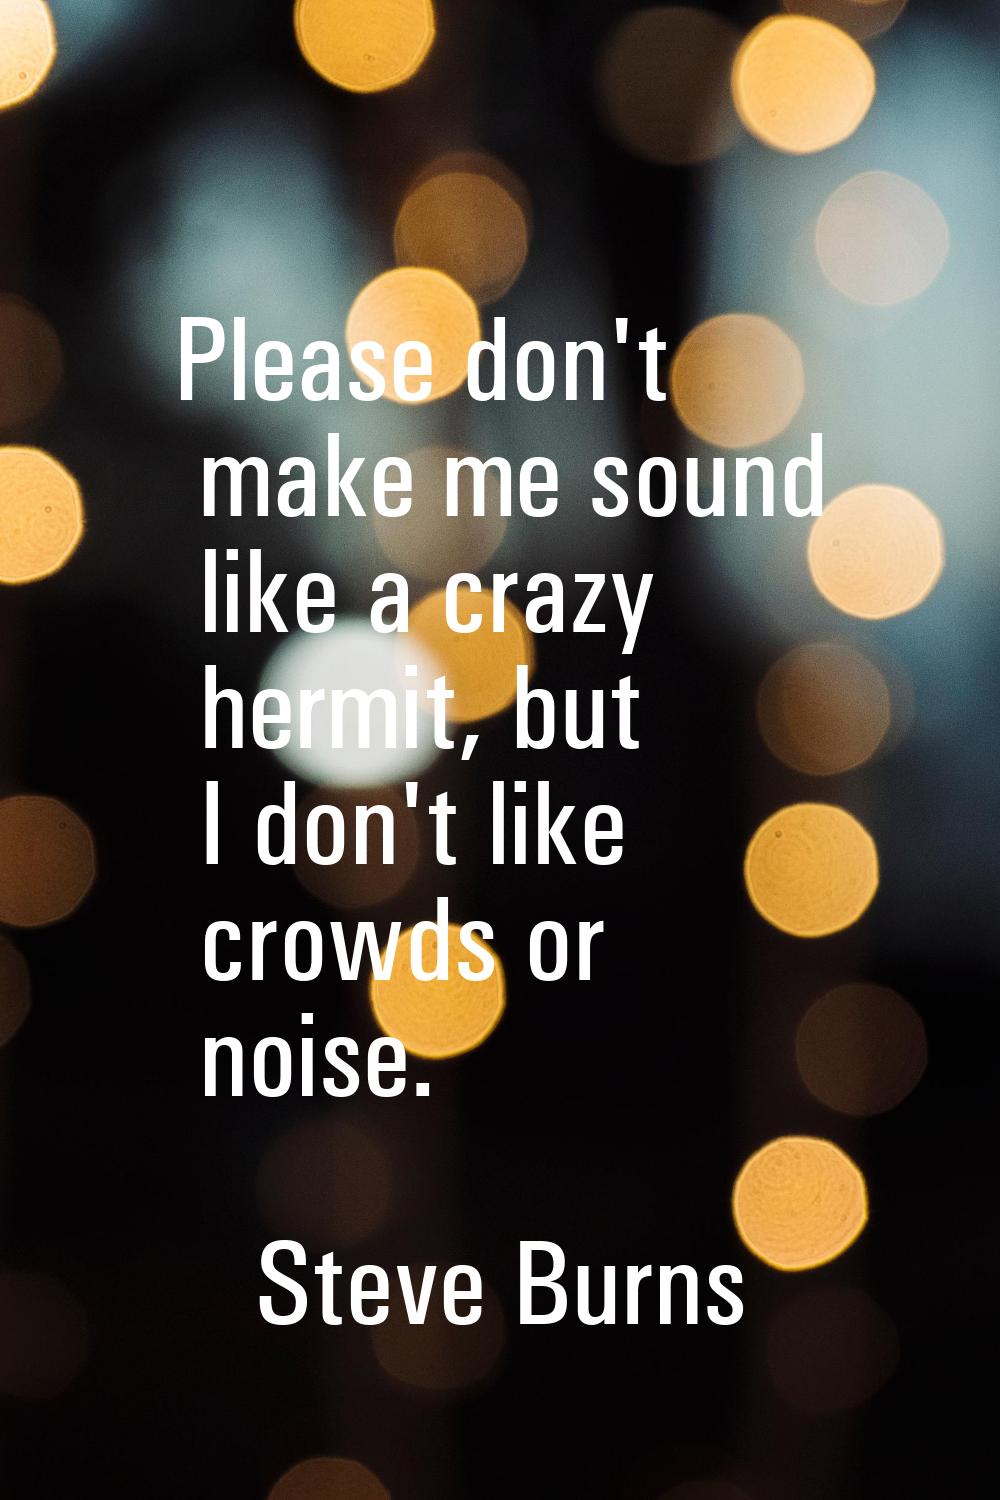 Please don't make me sound like a crazy hermit, but I don't like crowds or noise.